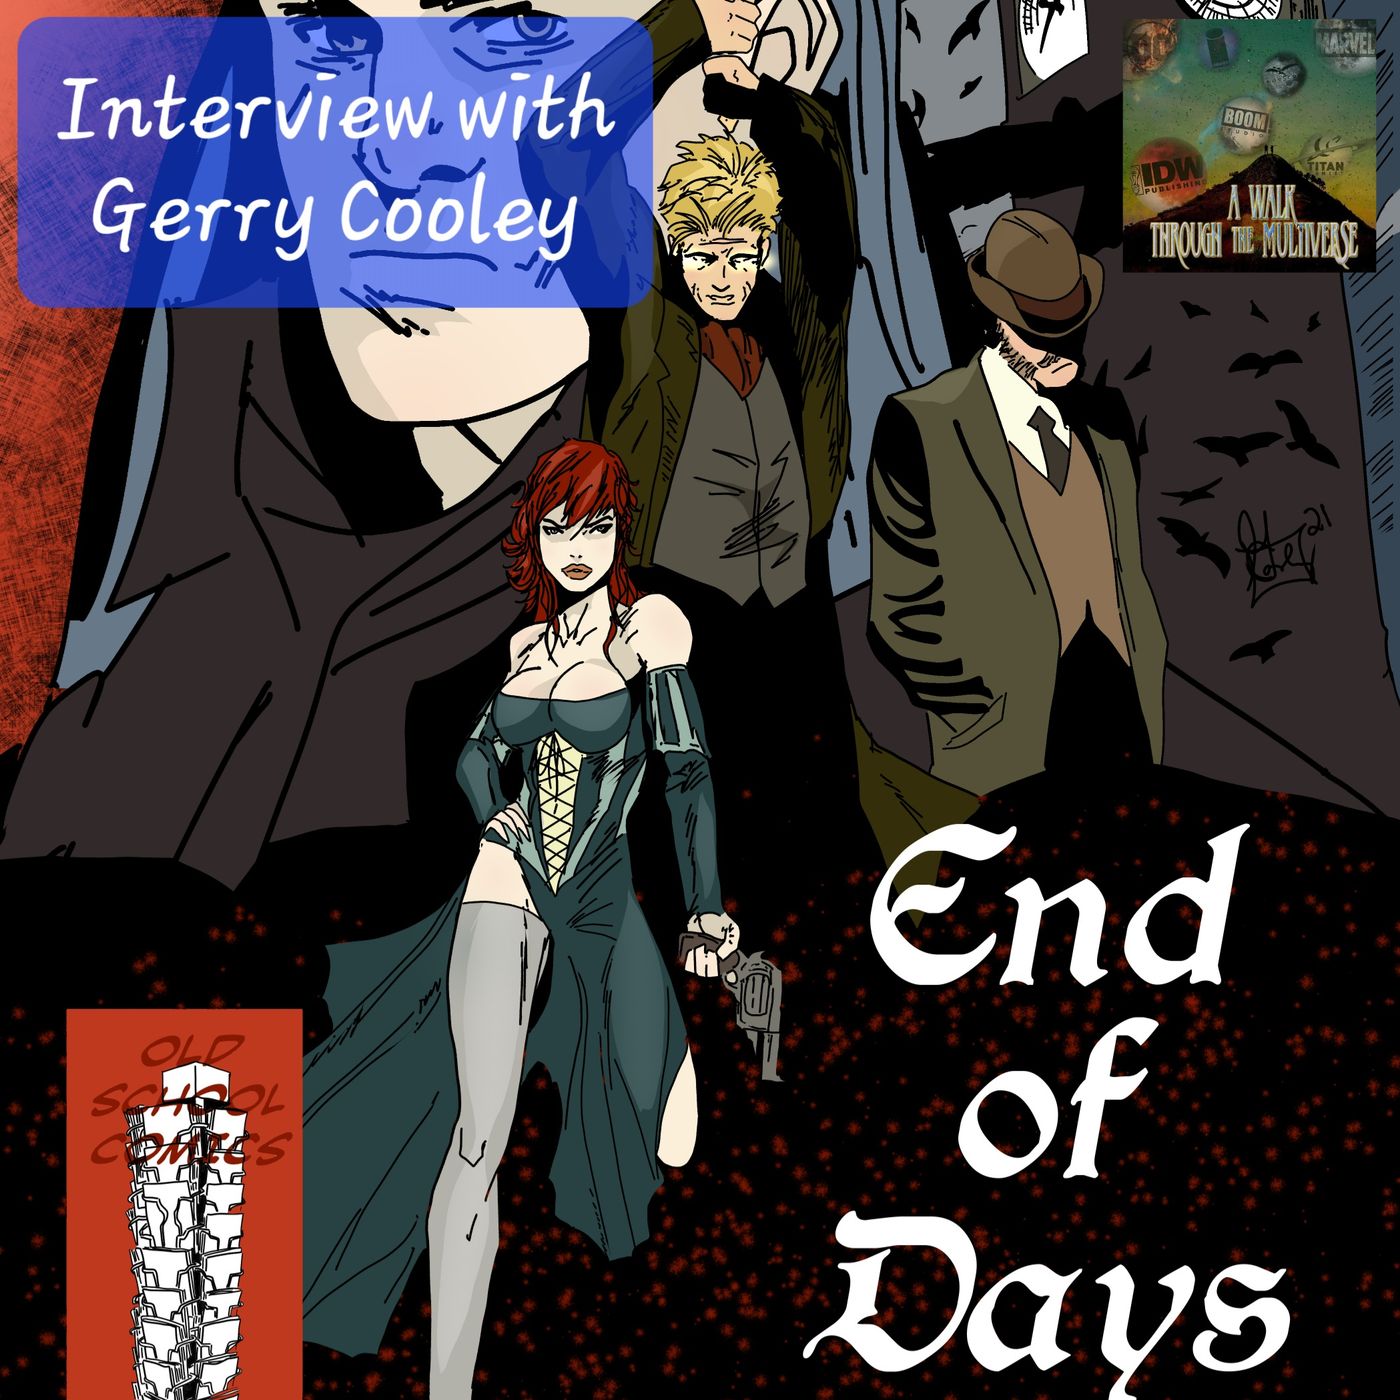 Interview with Gerry Cooley - A Walk Through The Multiverse Episode 21